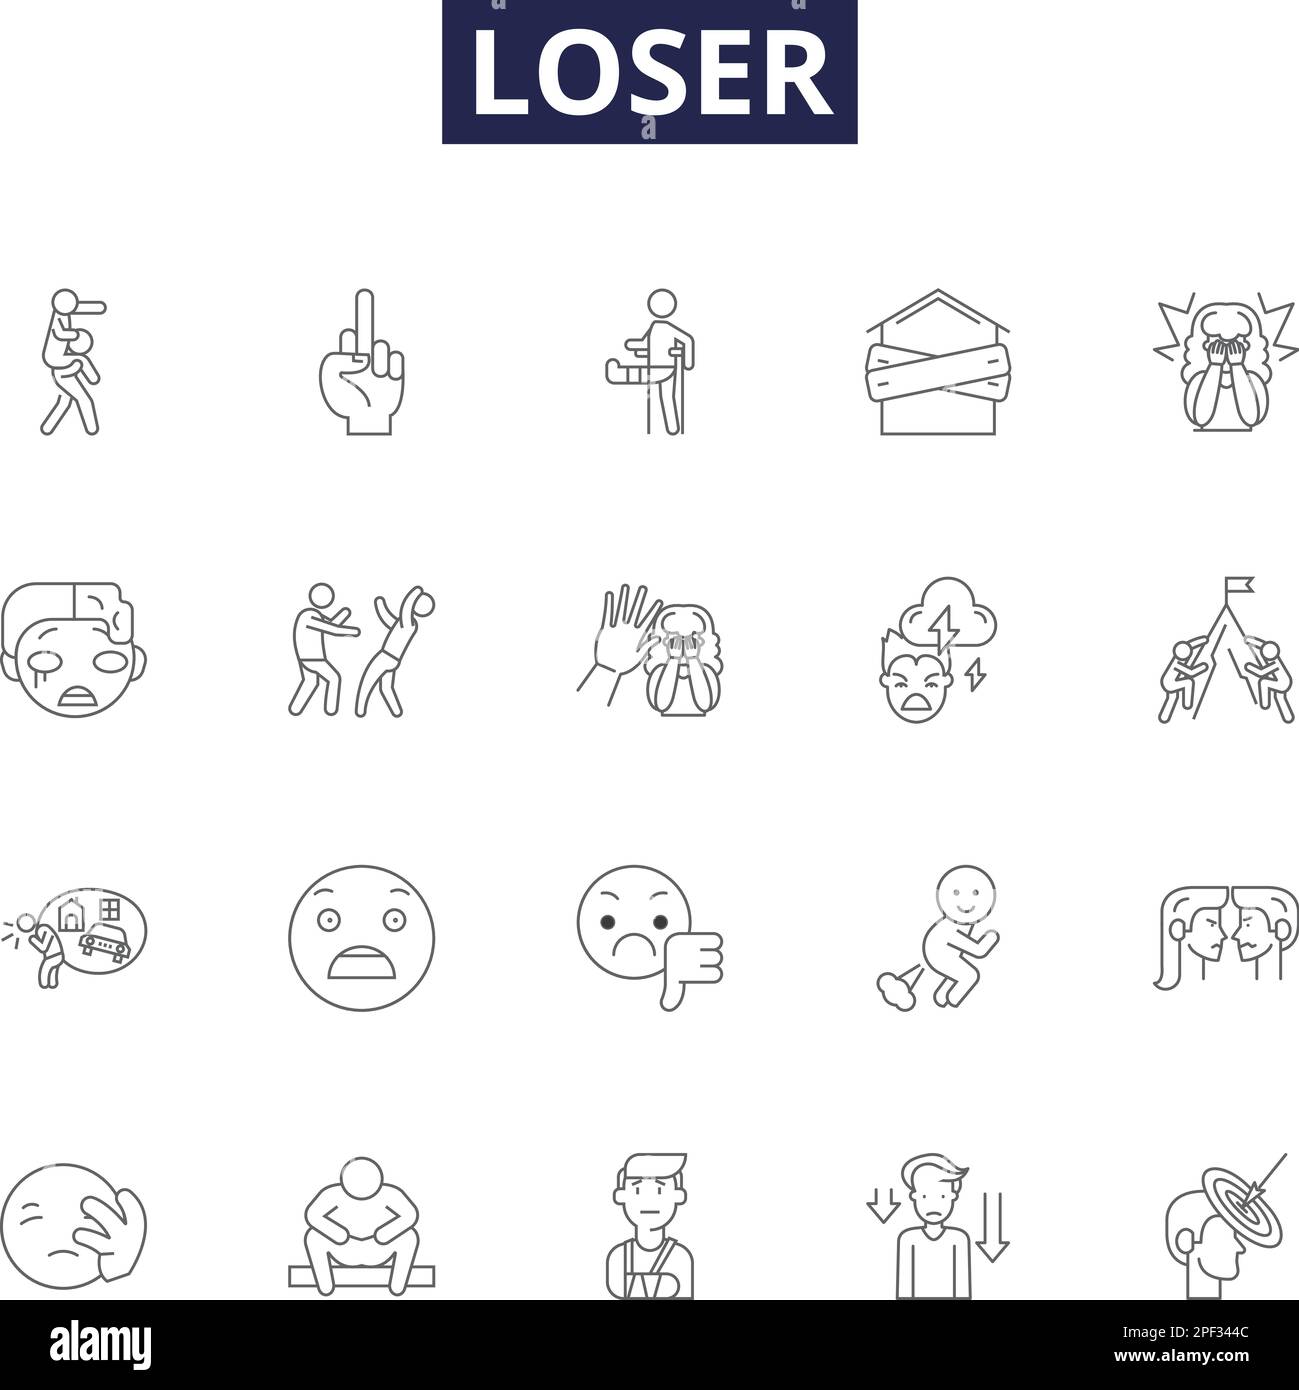 Loser line vector icons and signs. Unsuccessful, Inadequate, Impoverished, Disadvantaged, Fruitless, Disjointed, Humiliated, Trounced outline vector Stock Vector